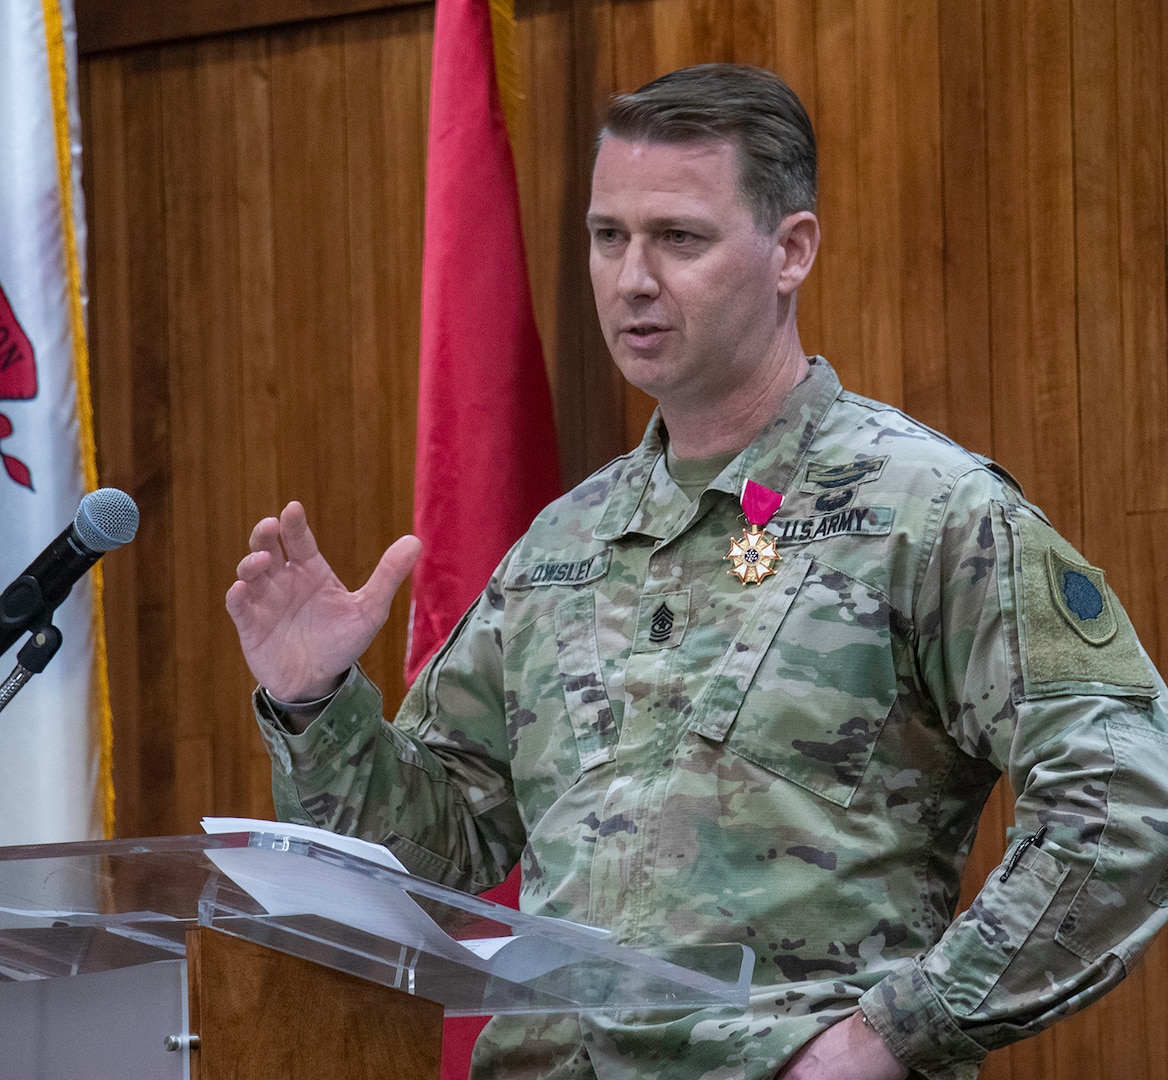 Sgt. Maj. David Owsley, of Forsyth, Illinois, speaks to those in attendance during his retirement ceremony April 1 at the Illinois Military Academy in Springfield, Illinois. Owsley retires after nearly 33 years of service in the Illinois Army National Guard.